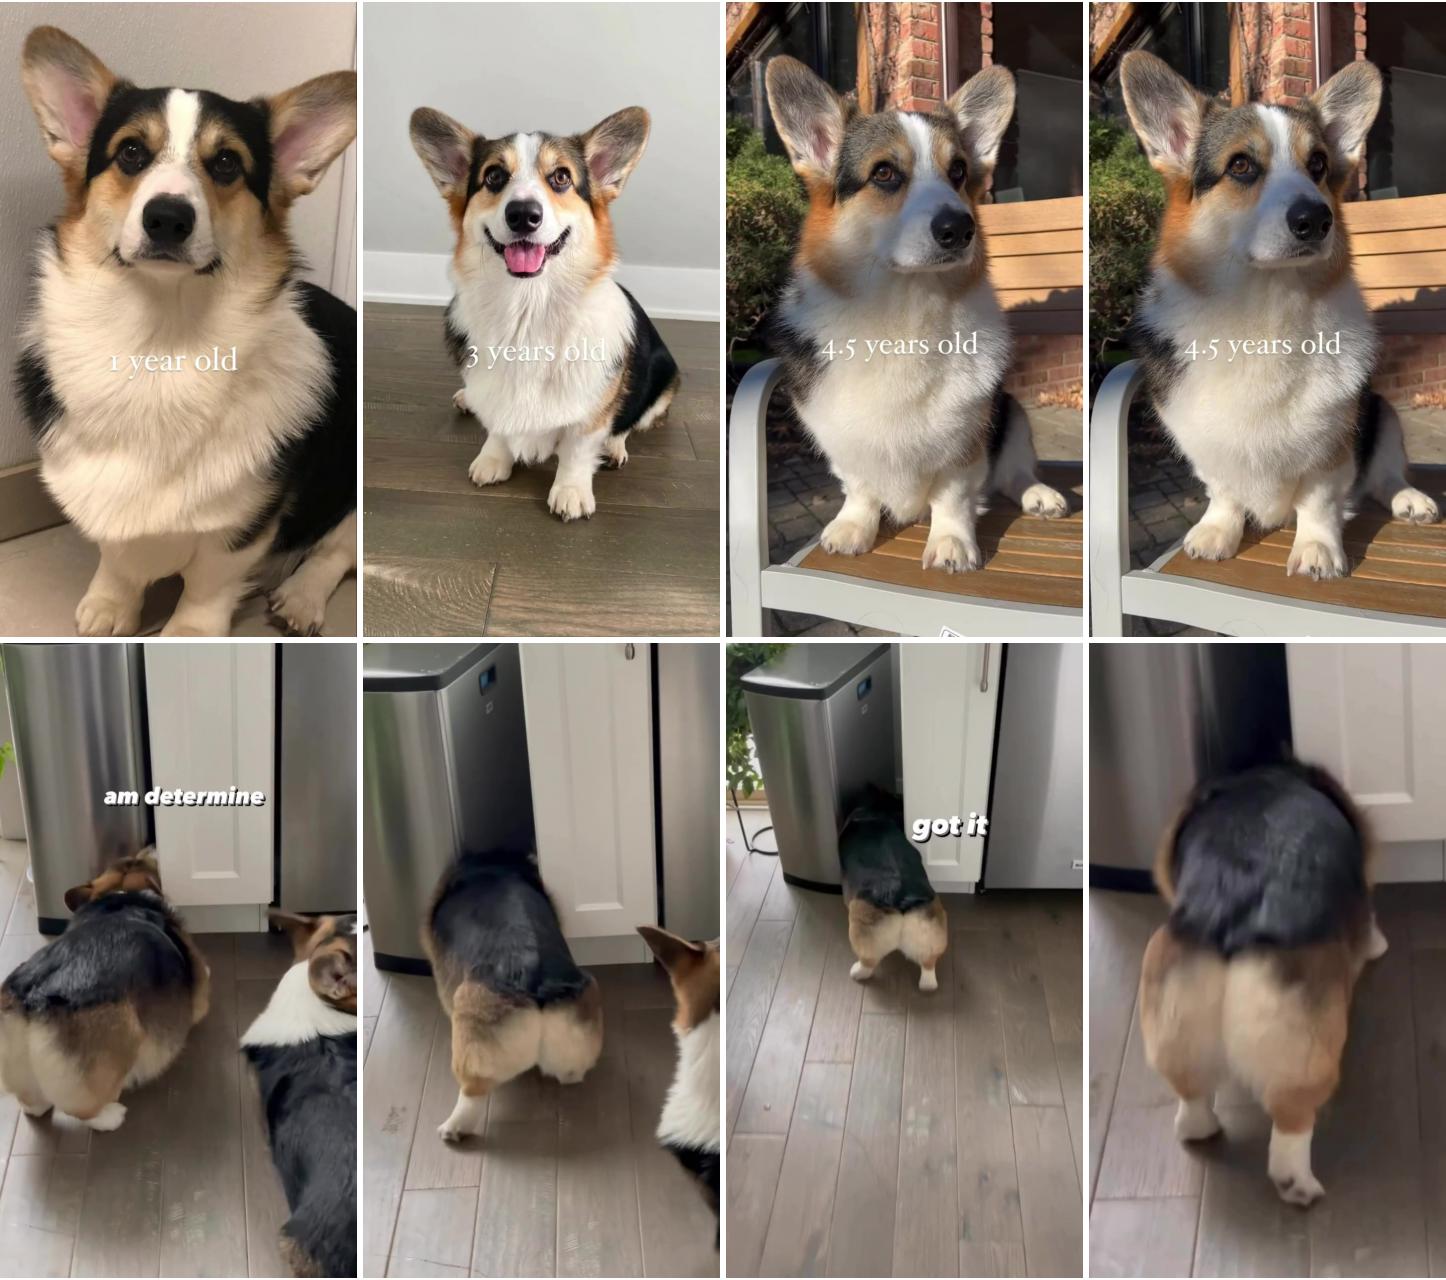 Graffiti throughout the years ; brady the corgi is determined to get a crumb that fell behind the trashcan